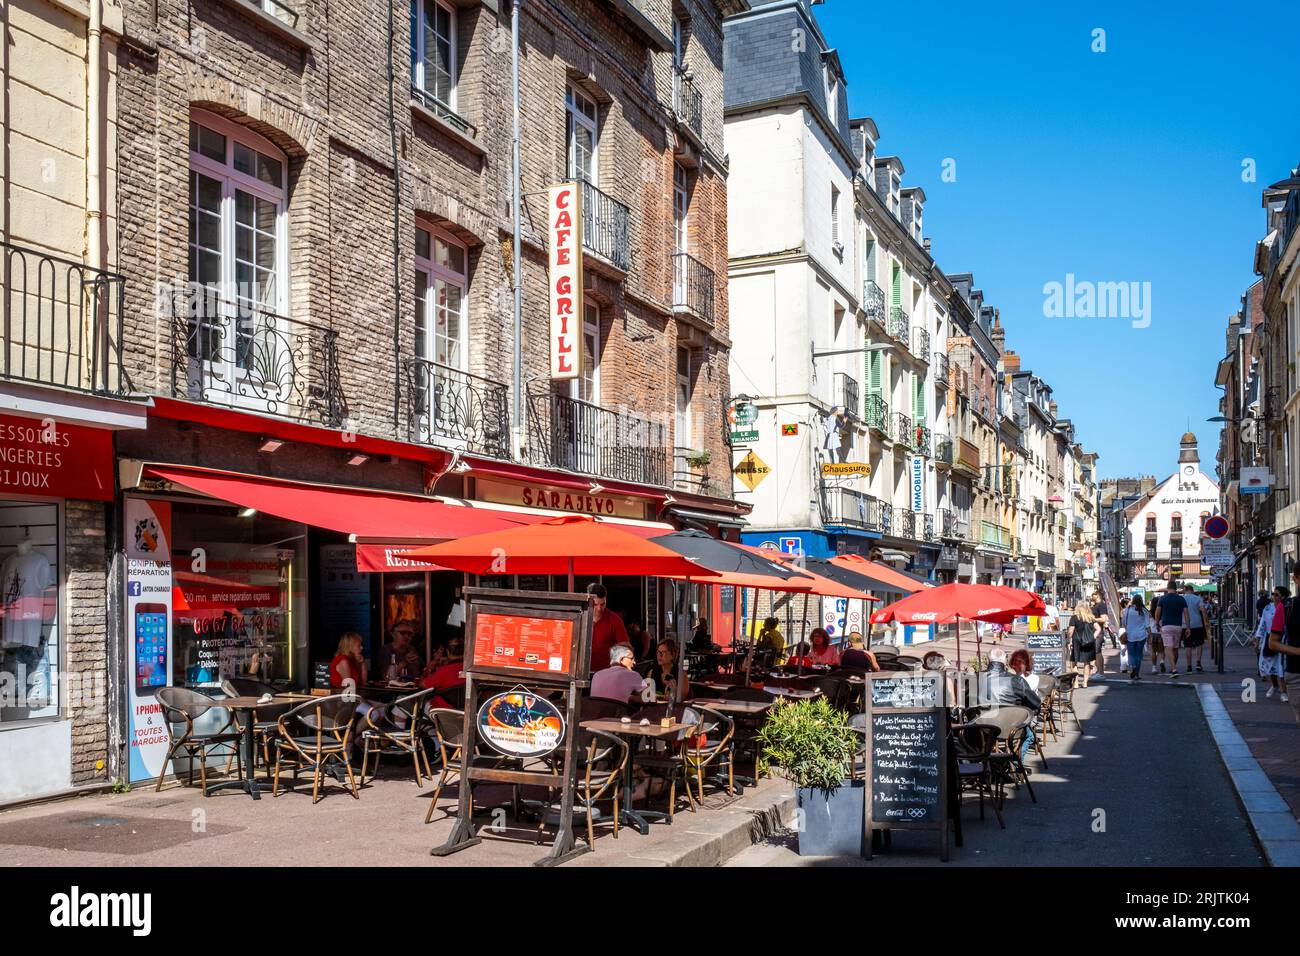 A Colourful Cafe/Restaurant In The Town Of Dieppe, Seine-Maritime Department, France. Stock Photo